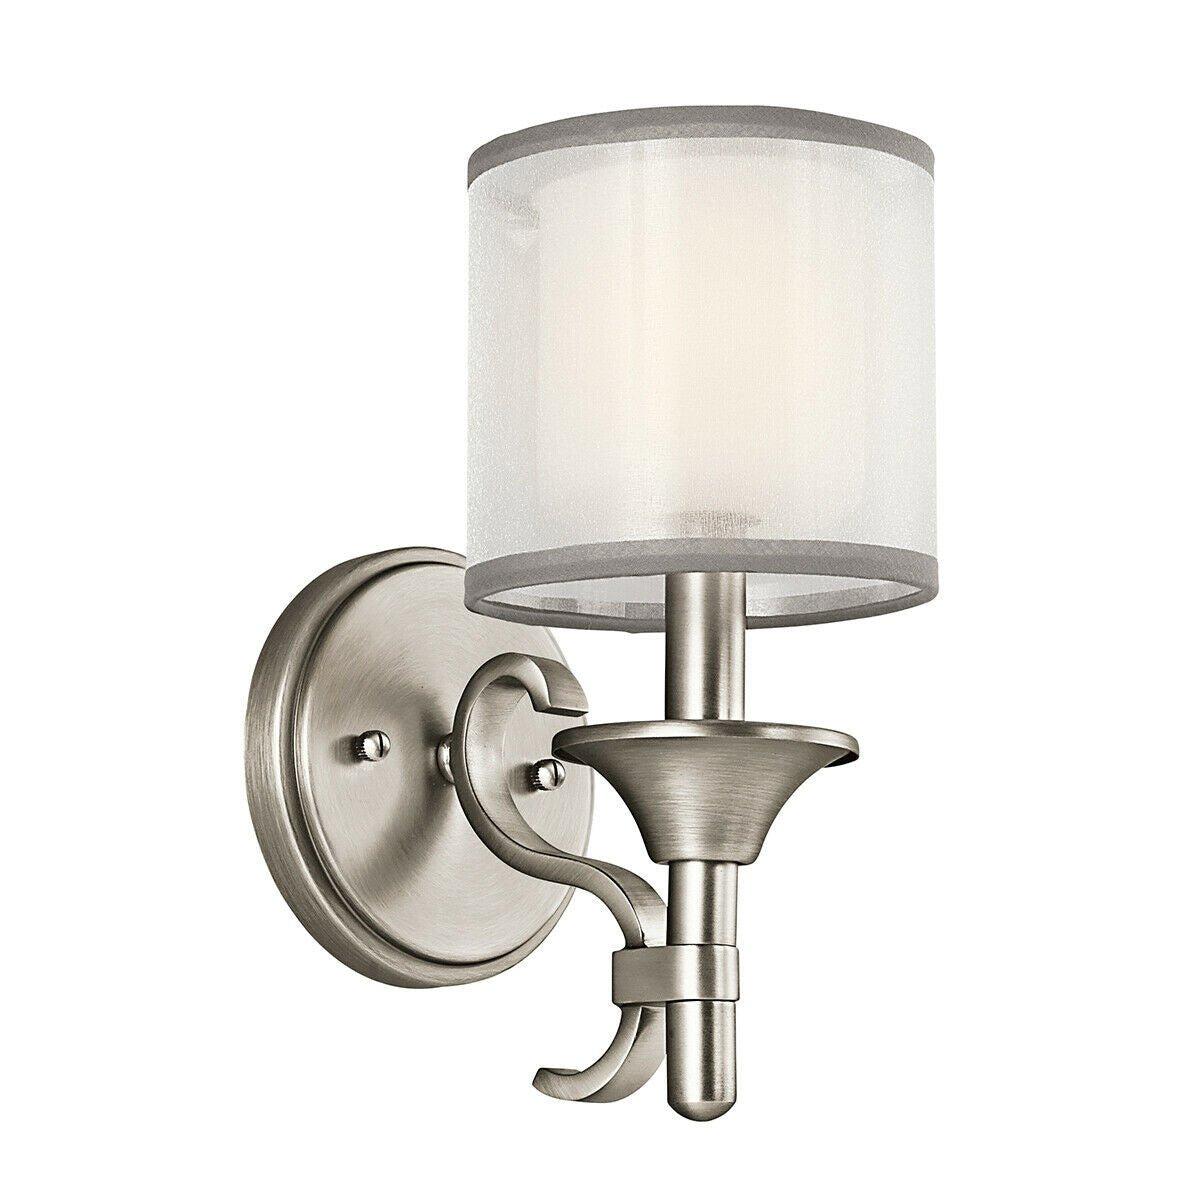 Wall Light Sconce WHITE ORGANAZA Shade Antique Pewter LED E14 60W Bulb